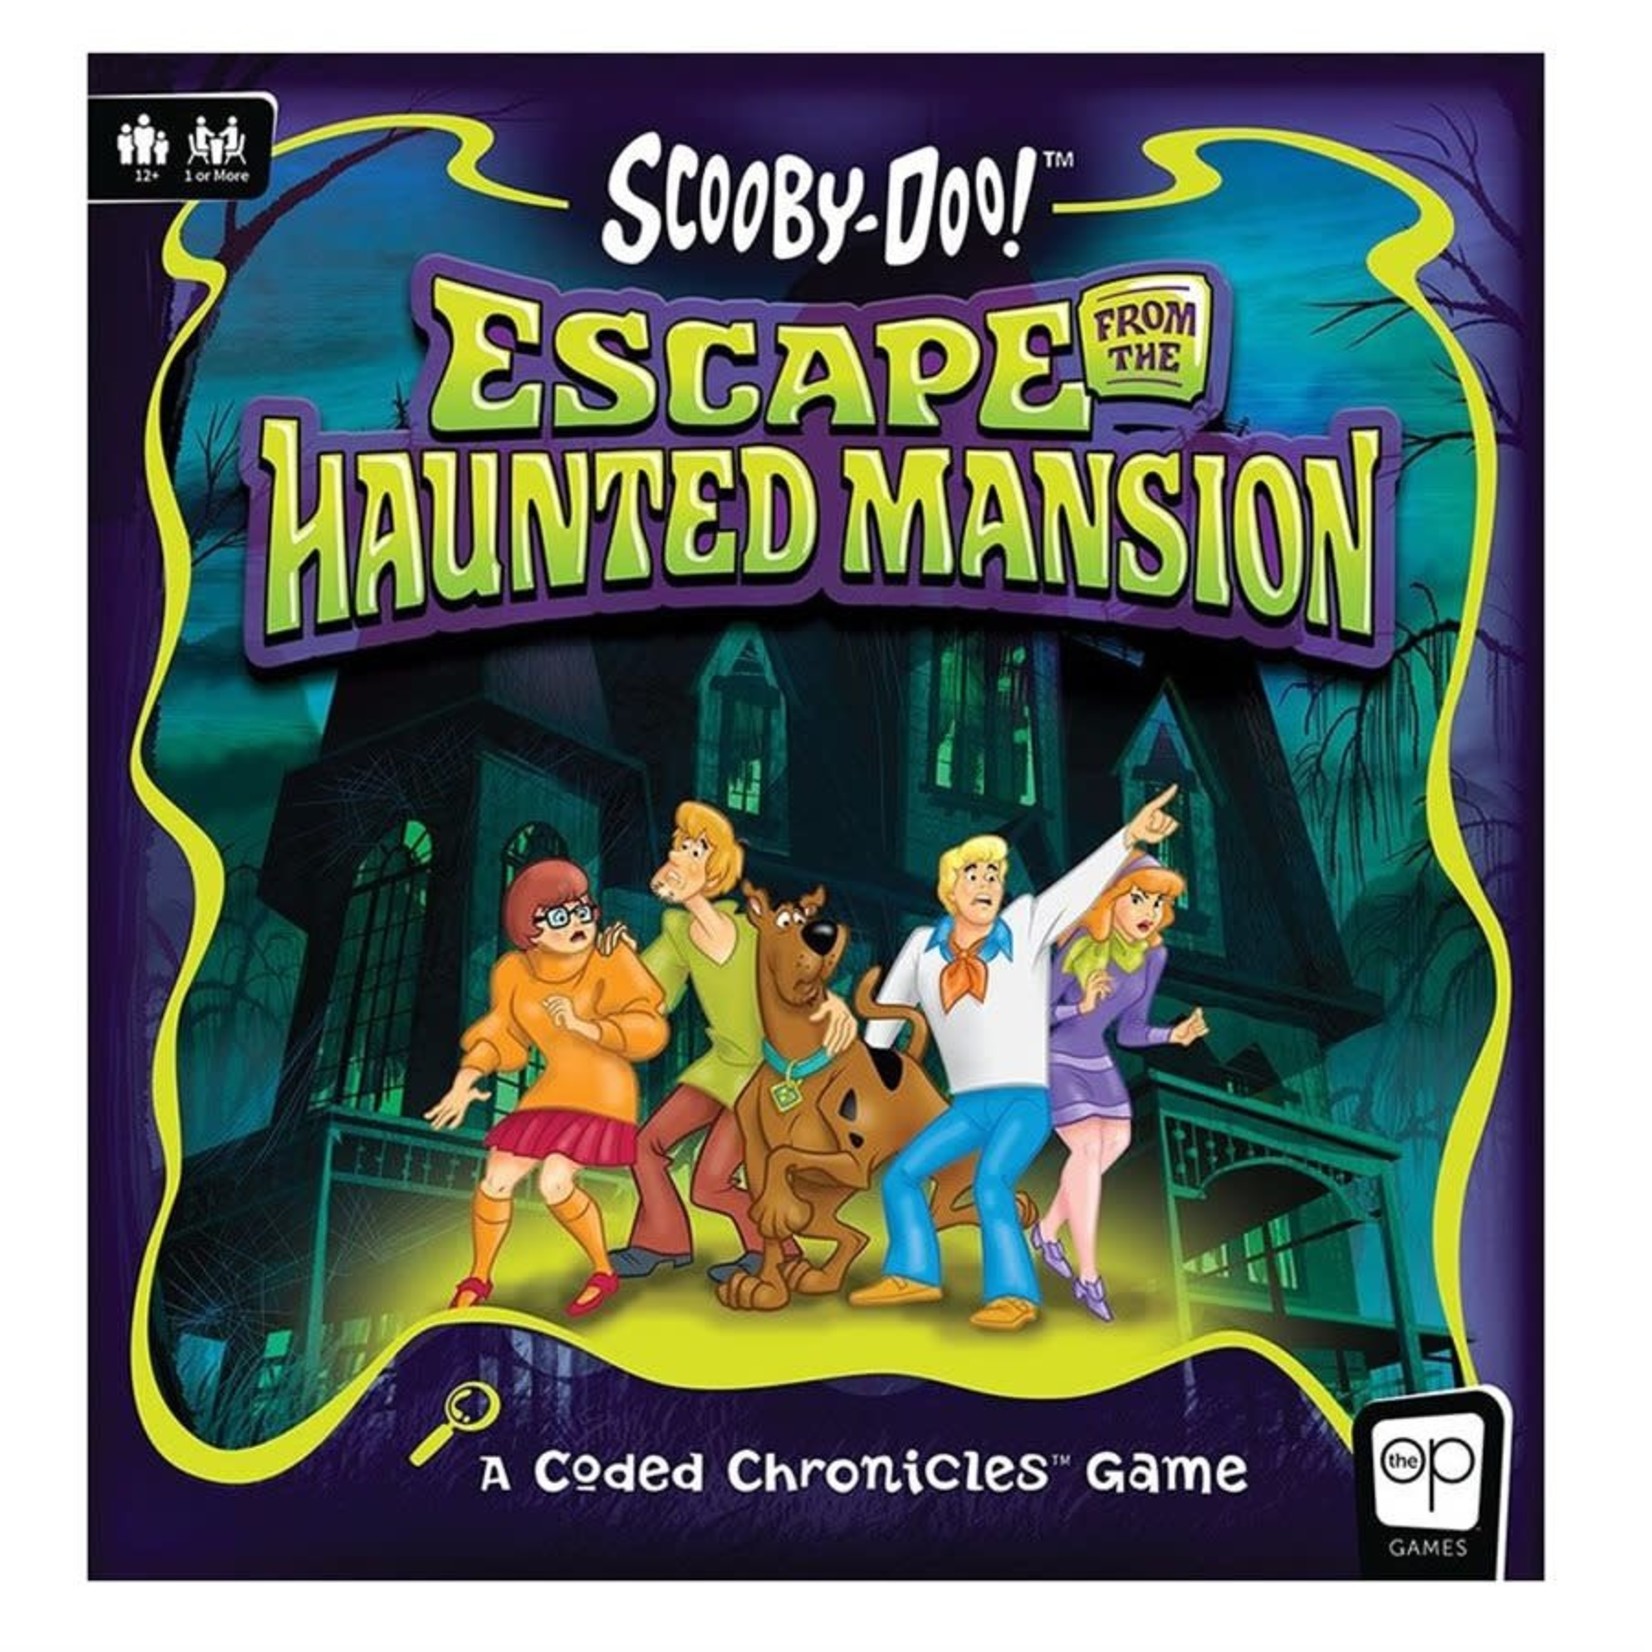 Scooby-Doo! Escape From The Haunted Mansion